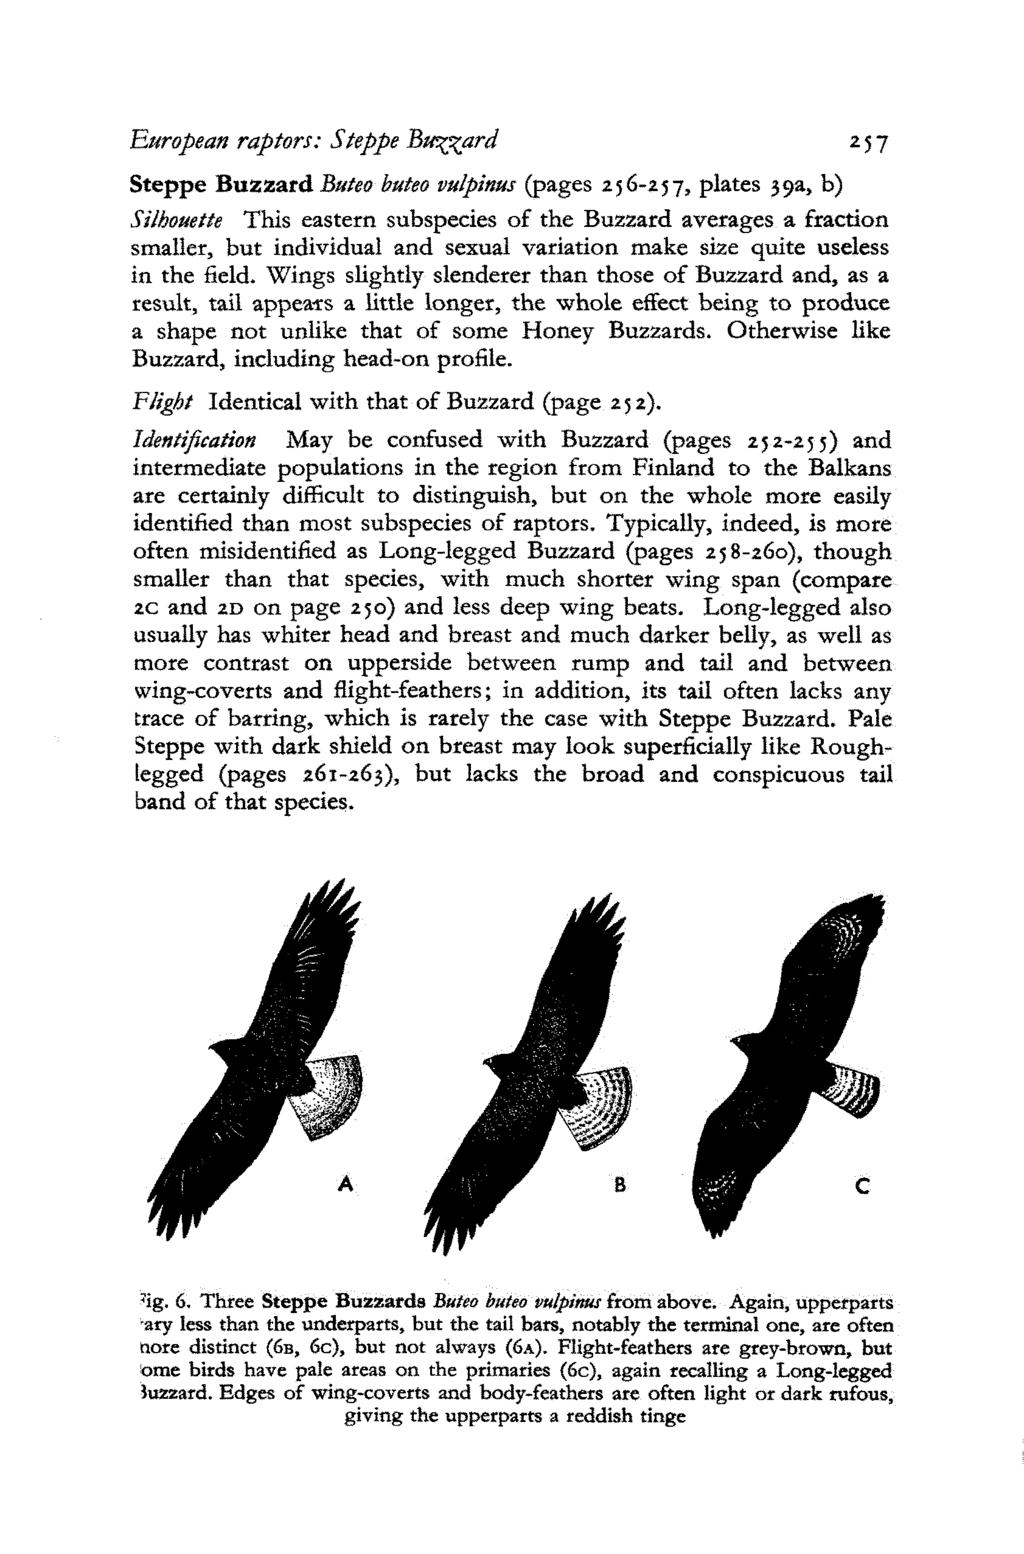 European raptors: Steppe Buzzard 257 Steppe Buzzard Buteo buteo vulpinus (pages 256-257, plates 39a, b) Silhouette This eastern subspecies of the Buzzard averages a fraction smaller, but individual